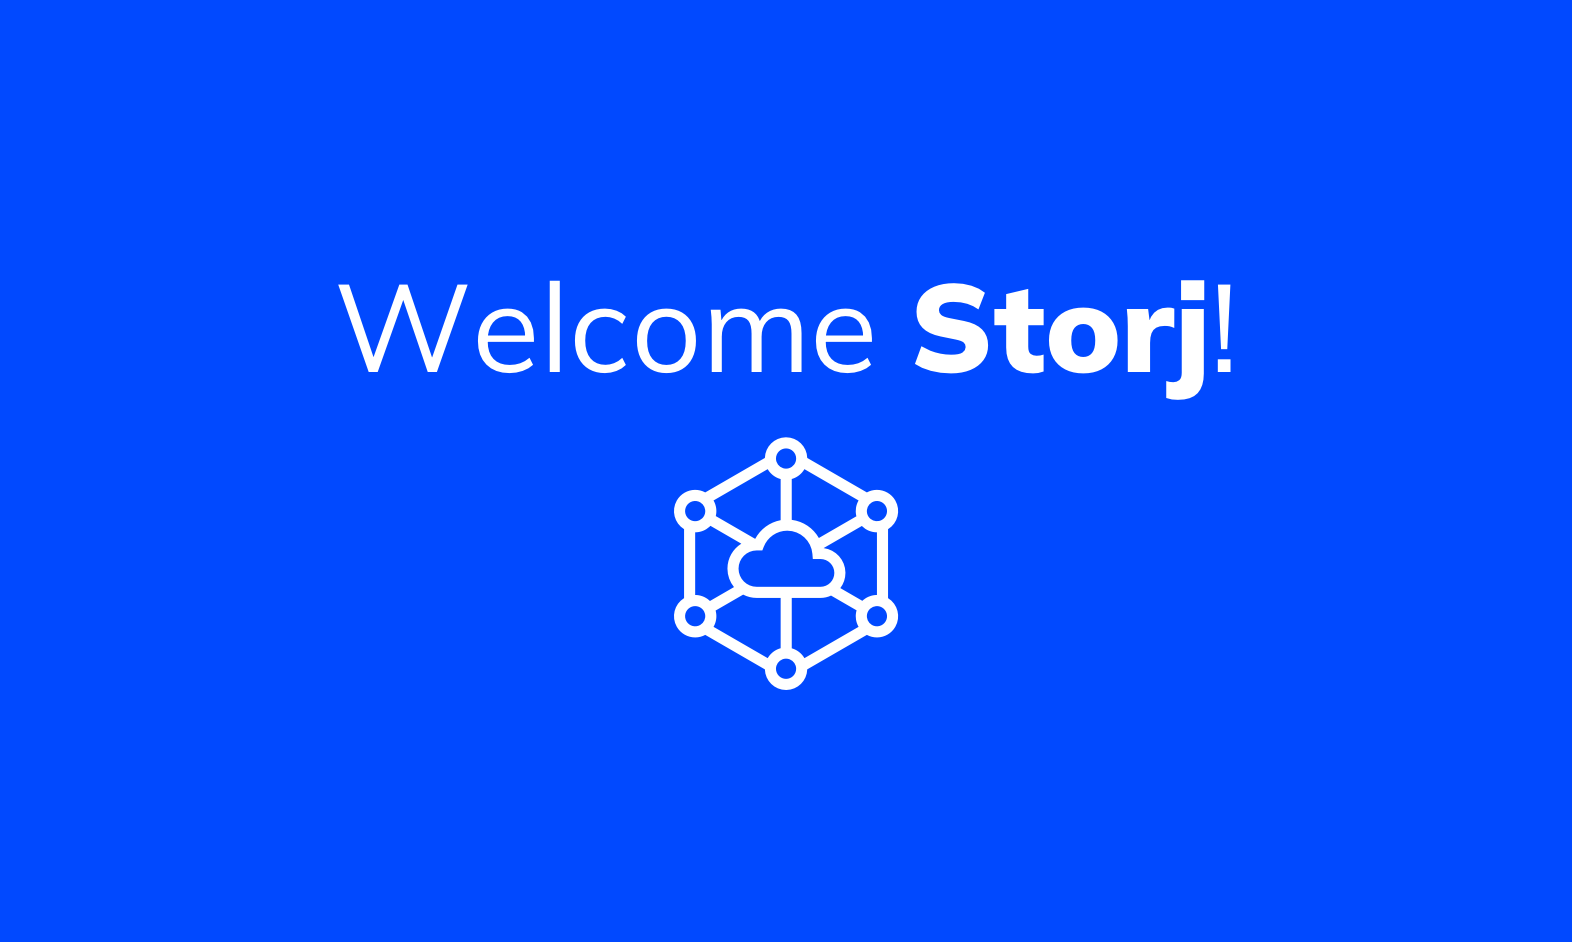 SimpleBackups Welcomes Storj: A New Era in Cloud Storage Options